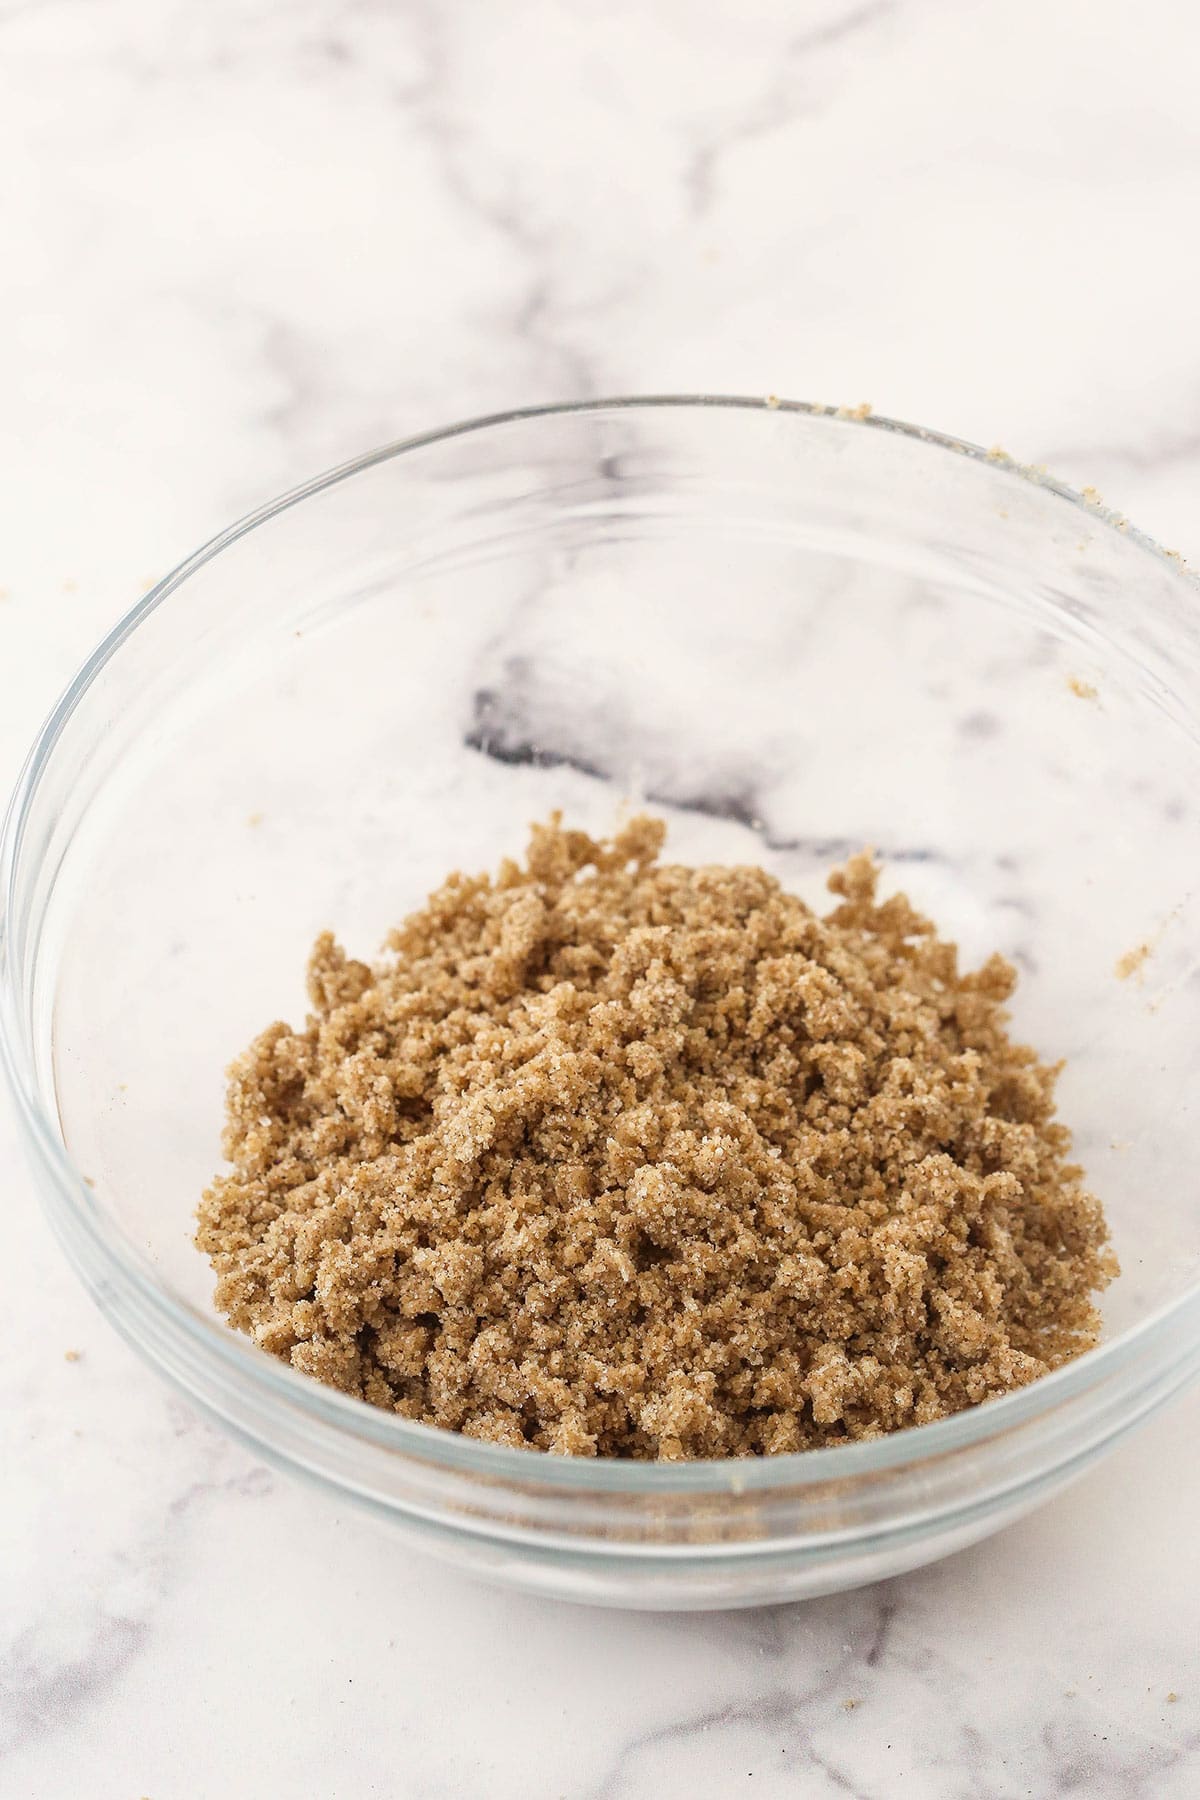 A homemade cinnamon streusel topping inside of a clear bowl on a kitchen countertop